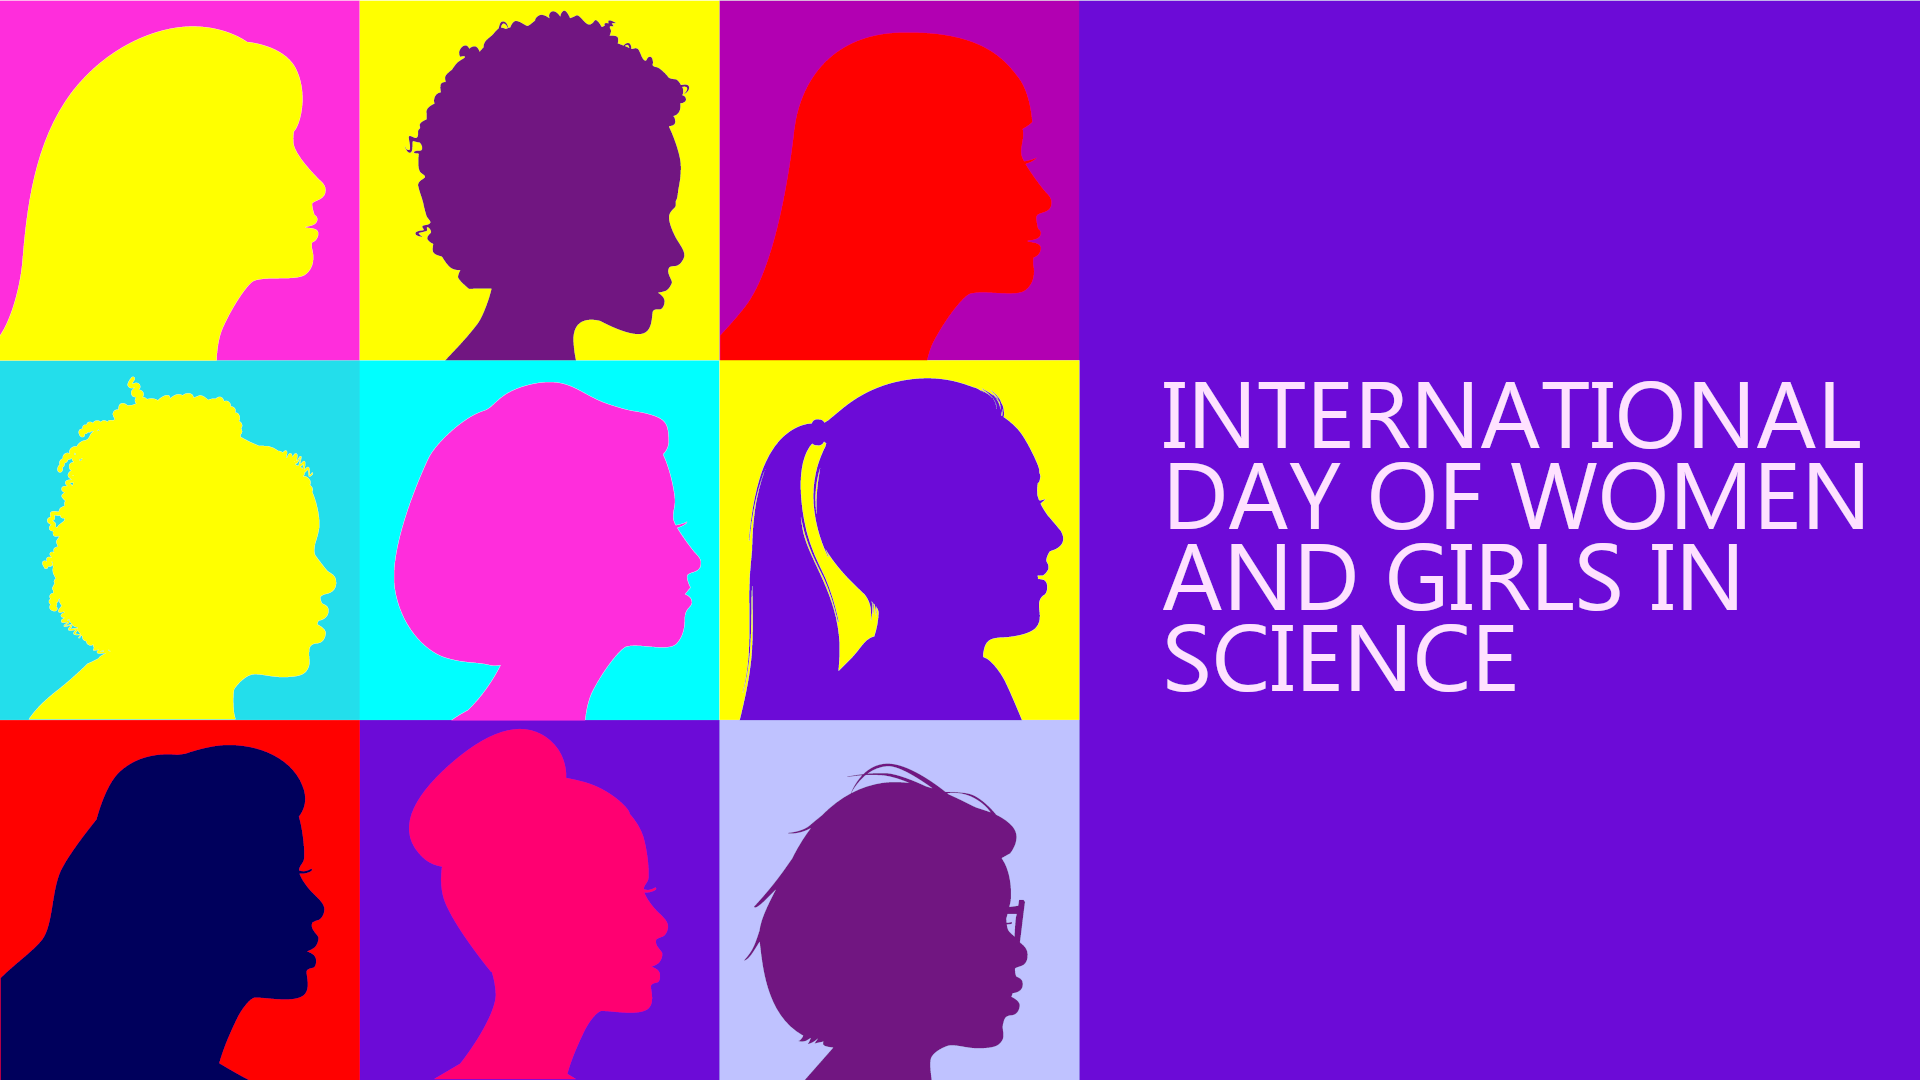 International Day of Women and Girls in Science image, different silhouettes of women